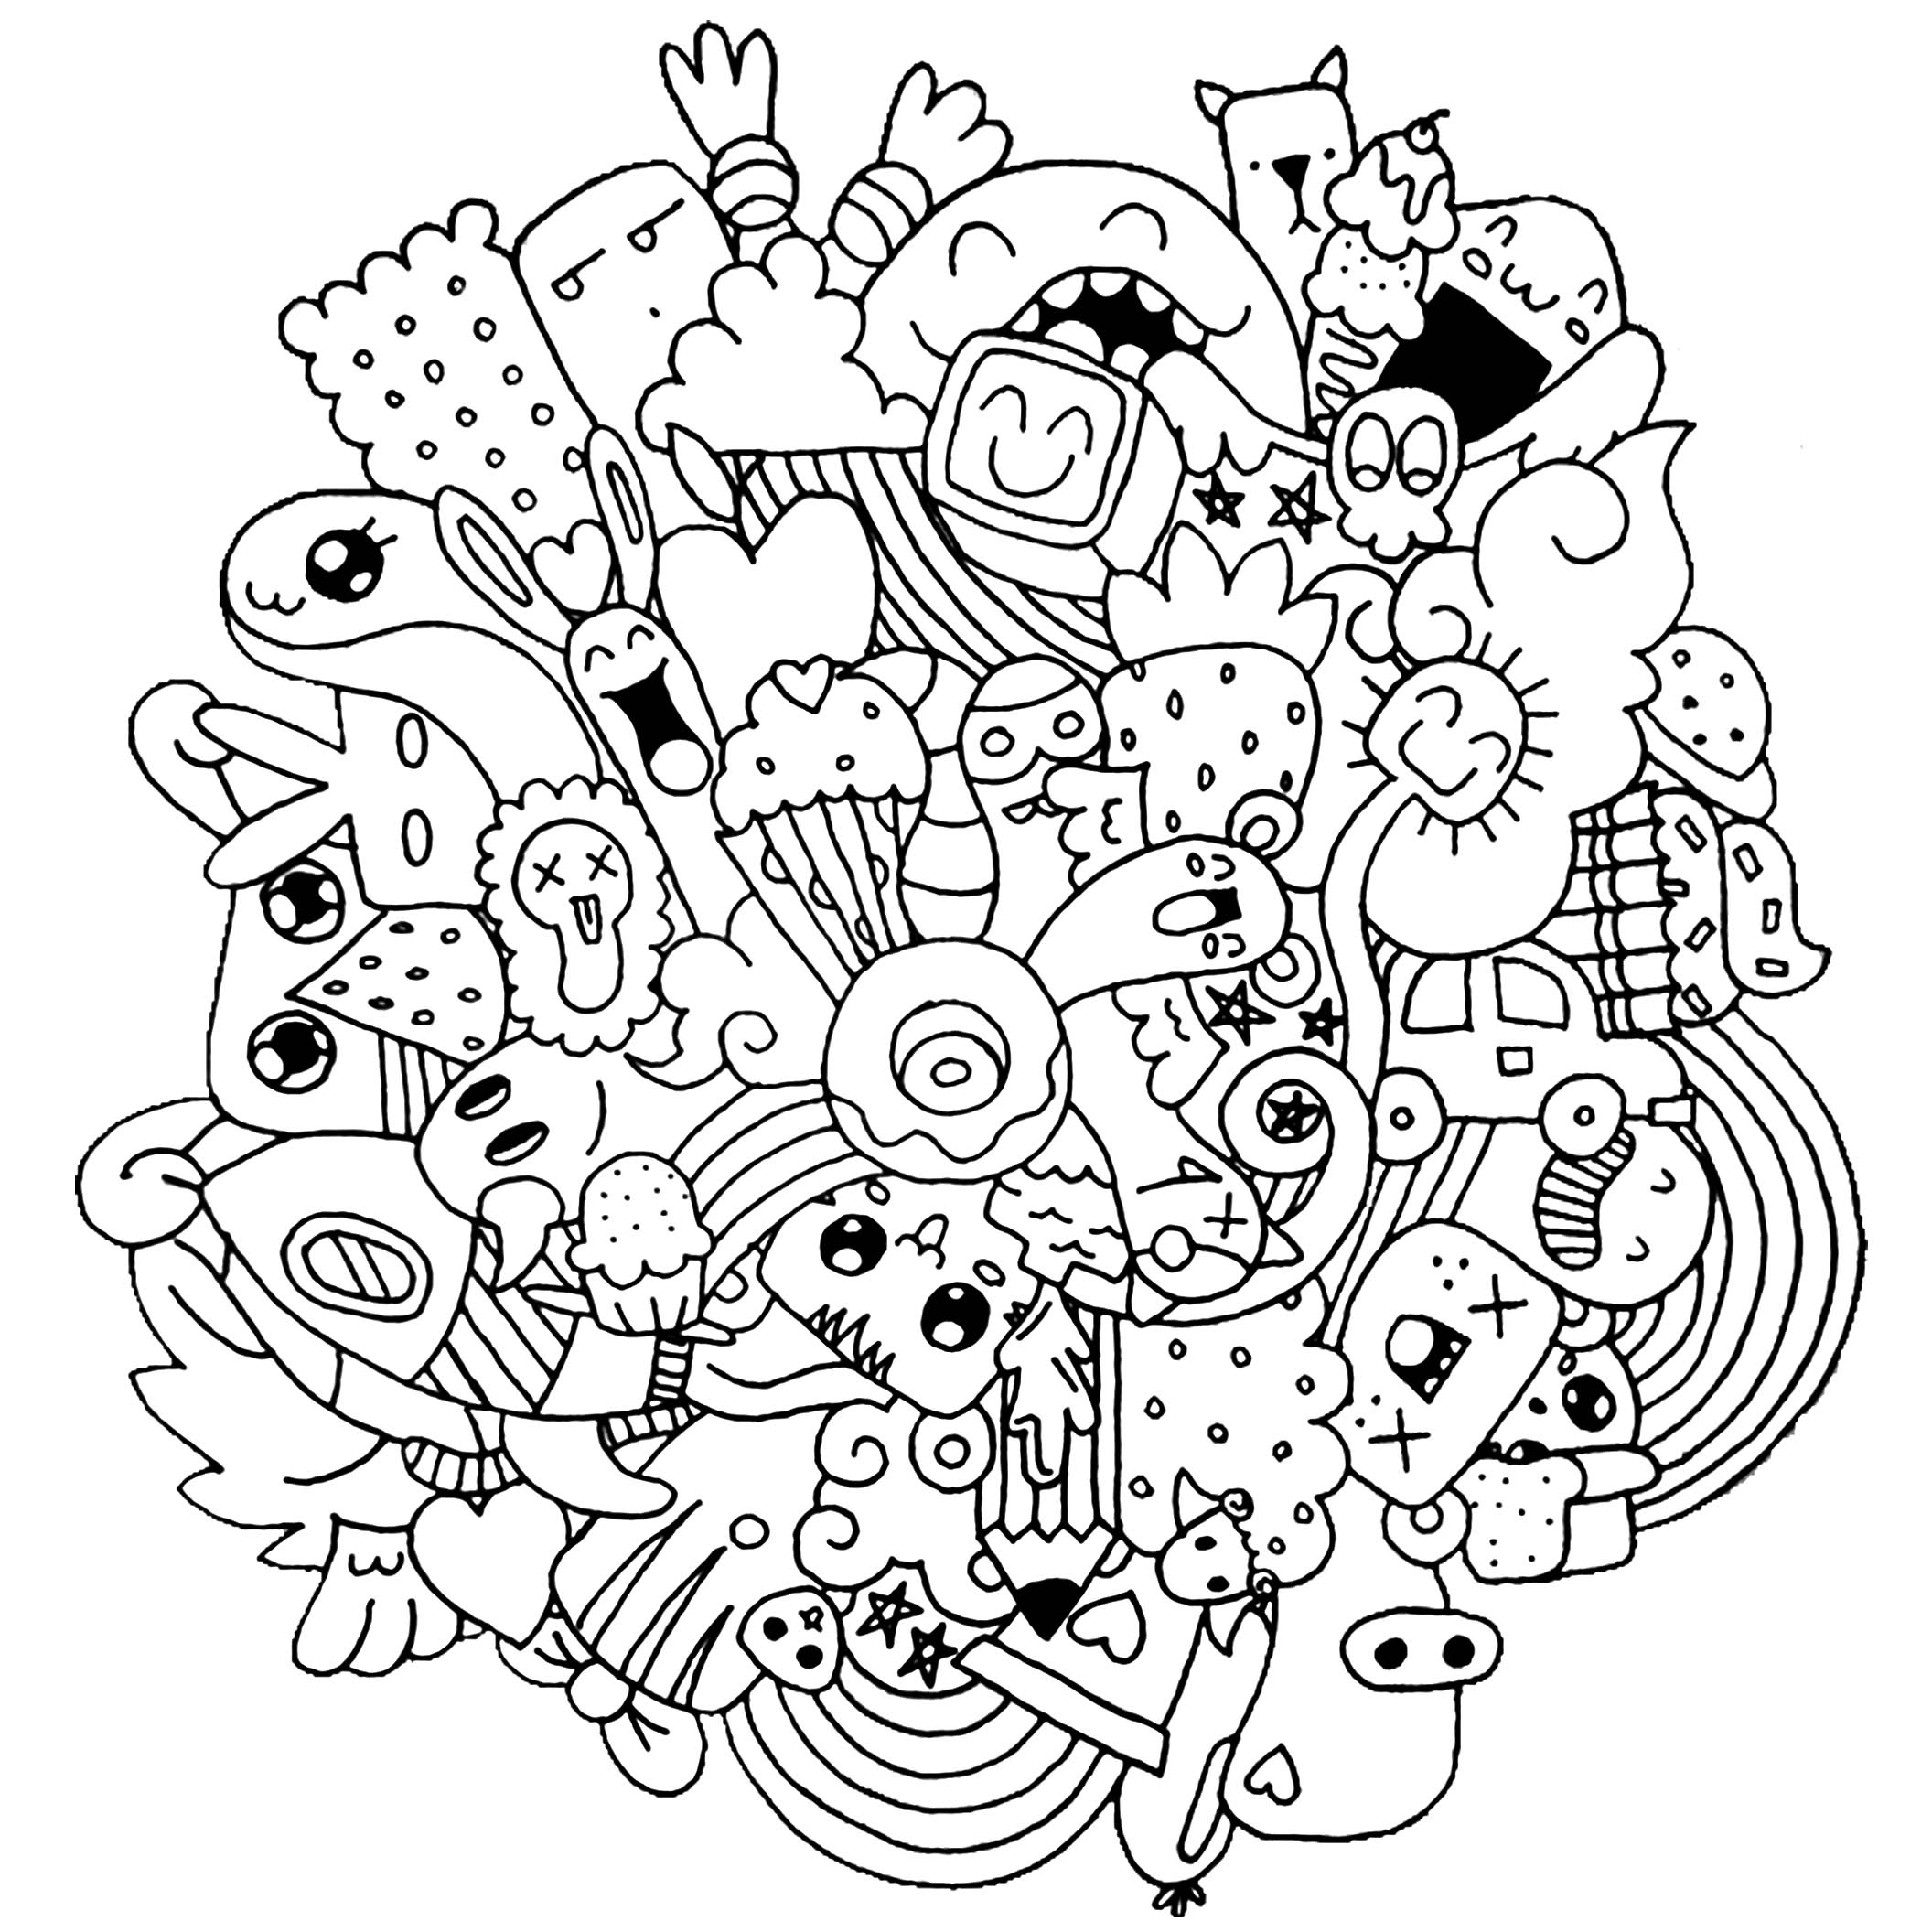 funny-creatures-doodle-art-kids-coloring-pages